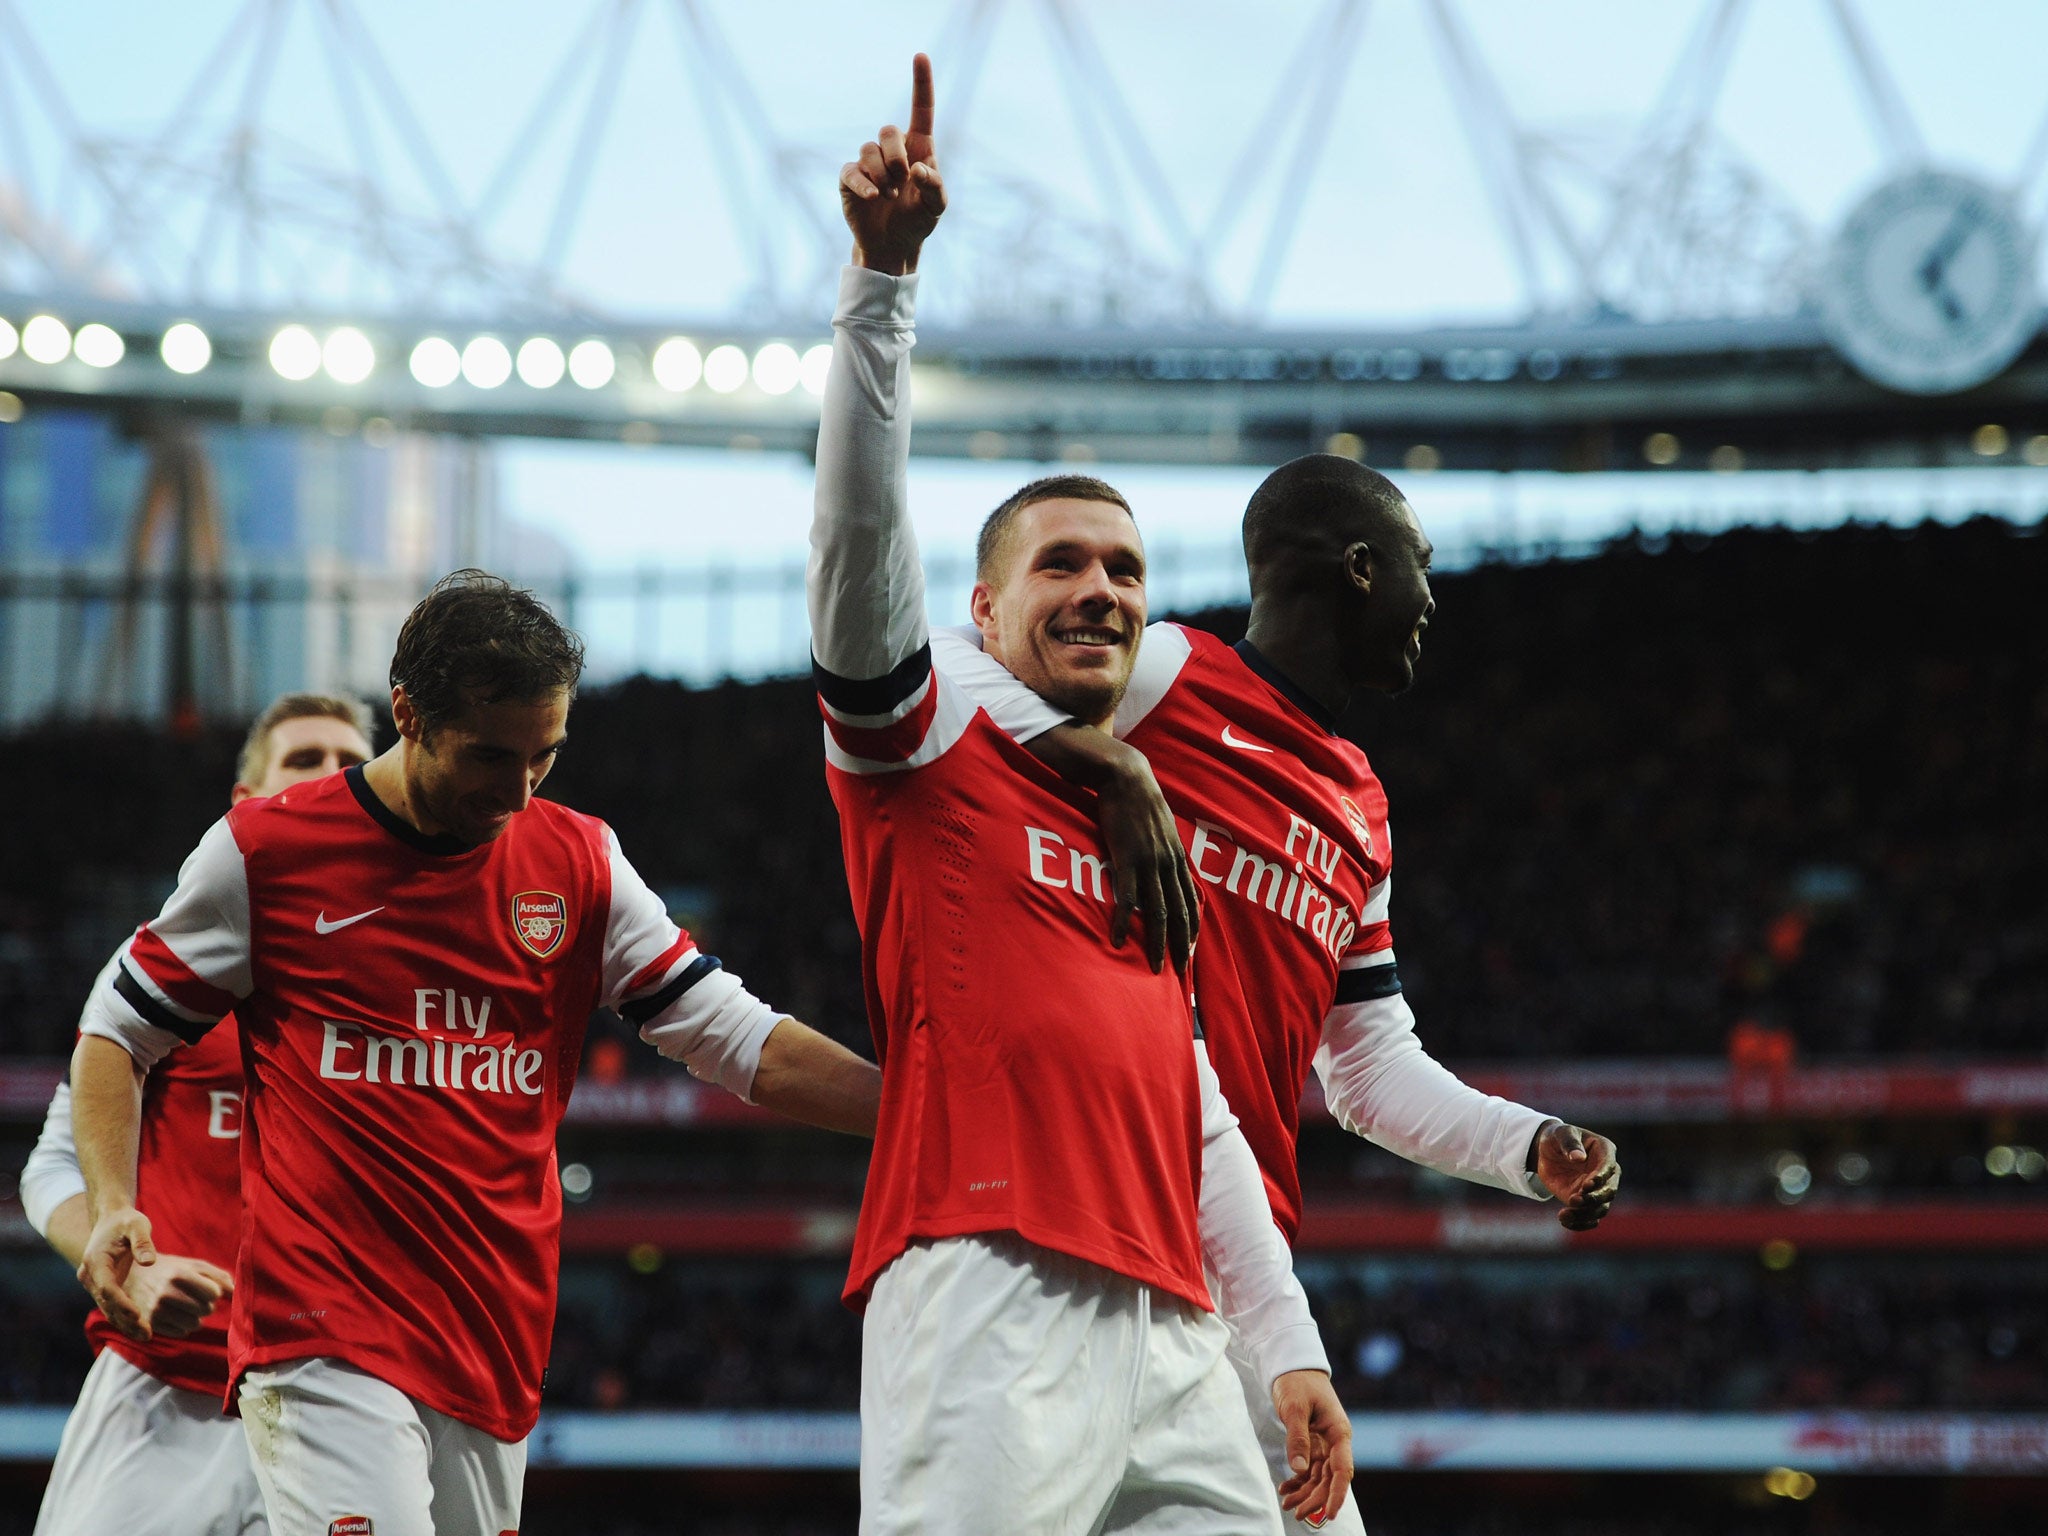 Luka Podolski celebrates after putting Arsenal 2-0 ahead against Liverpool in the FA Cup